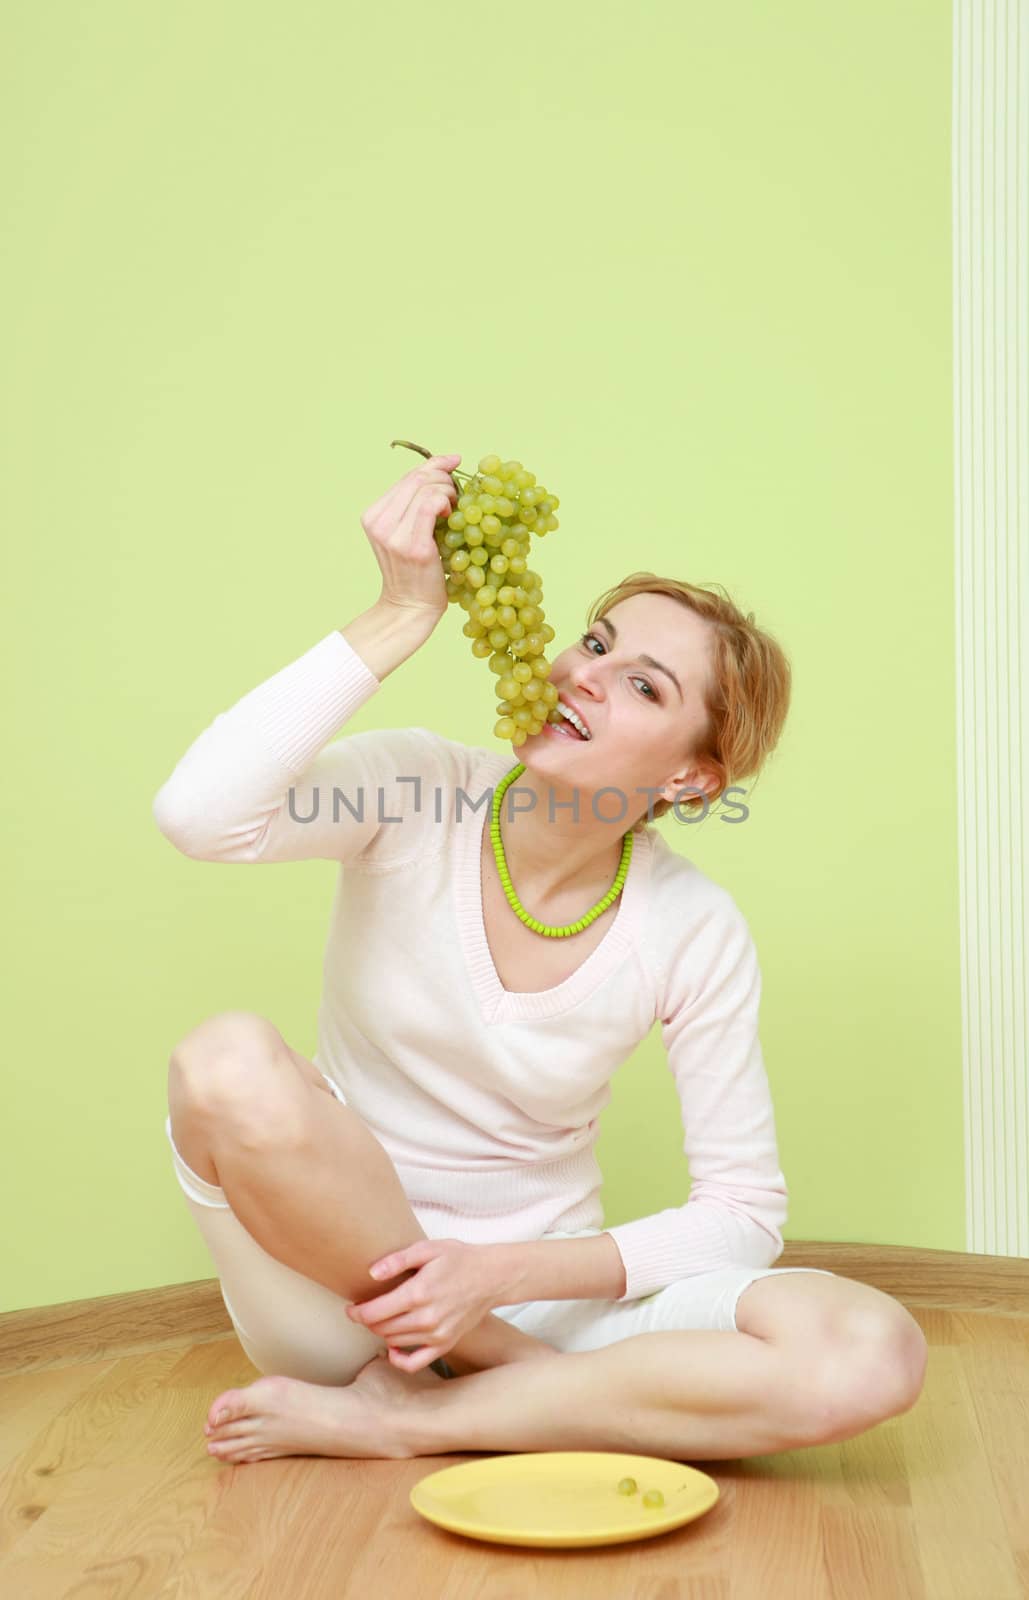 An image of a girl with a bunch of grapes